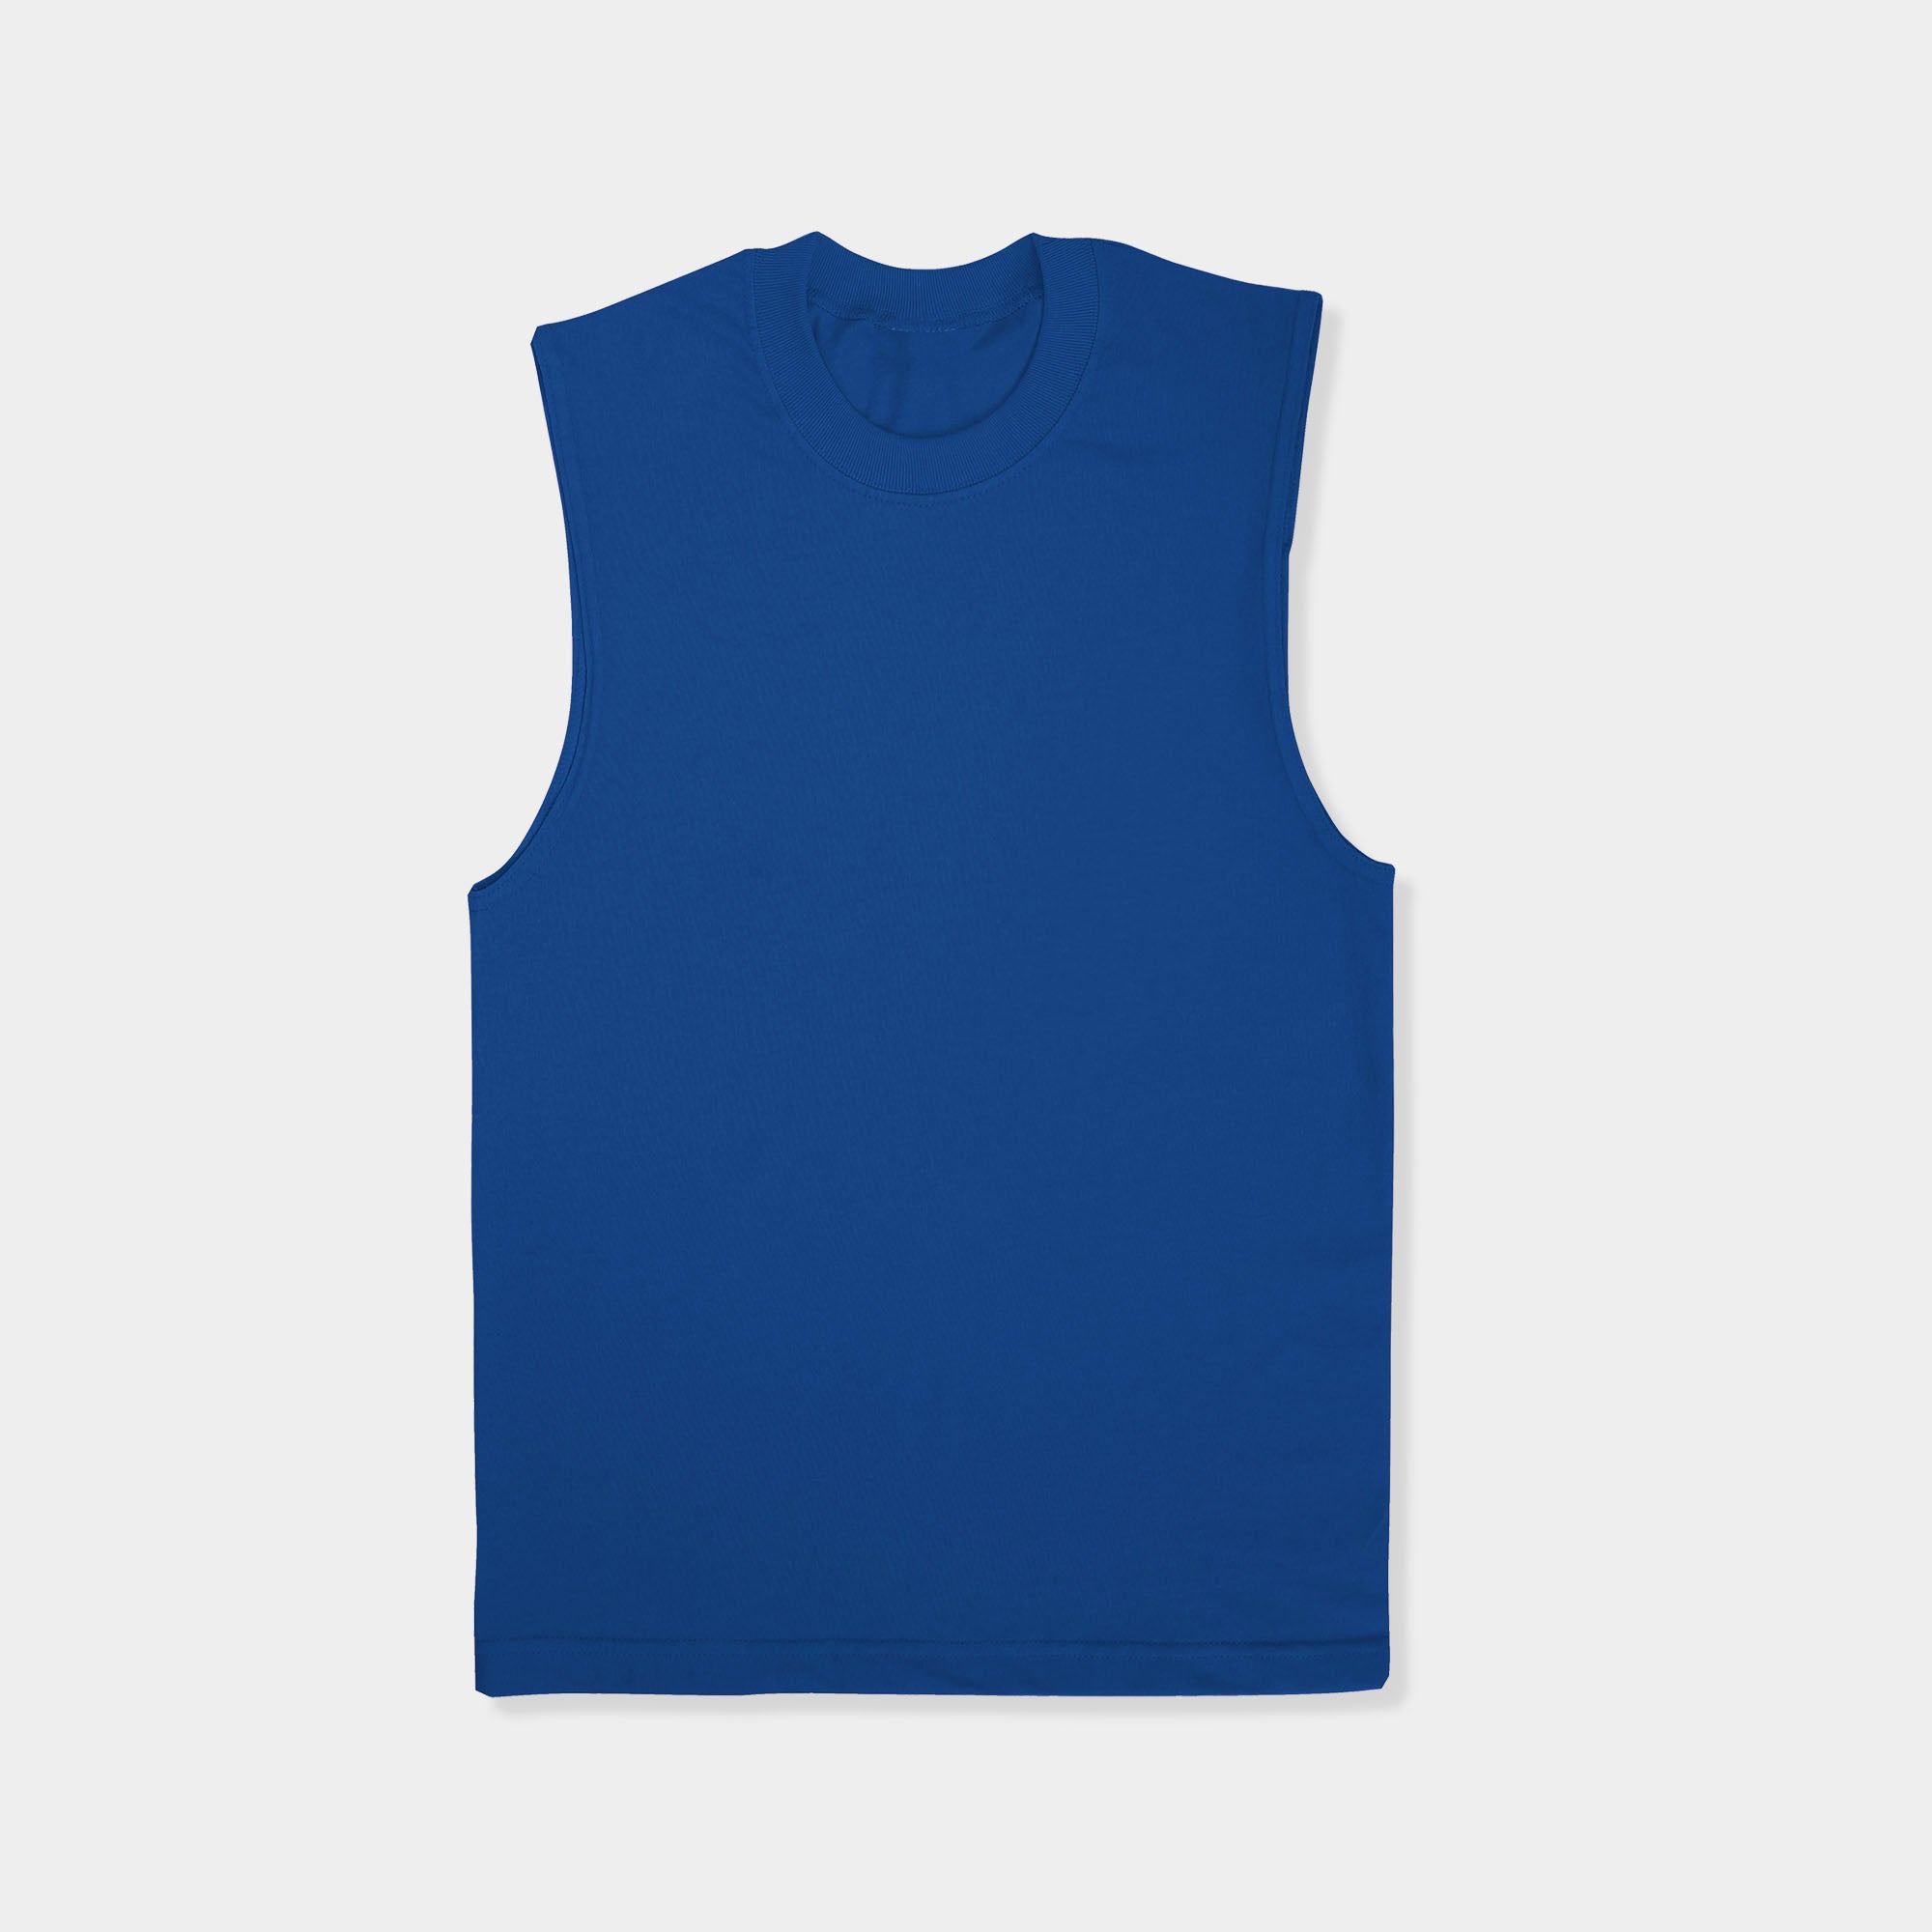 muscle_tank top_for_mens_sleeveless jersey_t shirt_jays_camiseta sin mangas_muscular_stafford shirts_youth_3xl_thermal tops_club dress_big and tall_tutle necks_shurt_muscle_topes_peterbilt_heavyweight_heavy weight _duty_ready_heather gray_cotton_roomie shirt_gym workout_without undershirt_black sando_cutoff sports_vivid color_colour_Royal